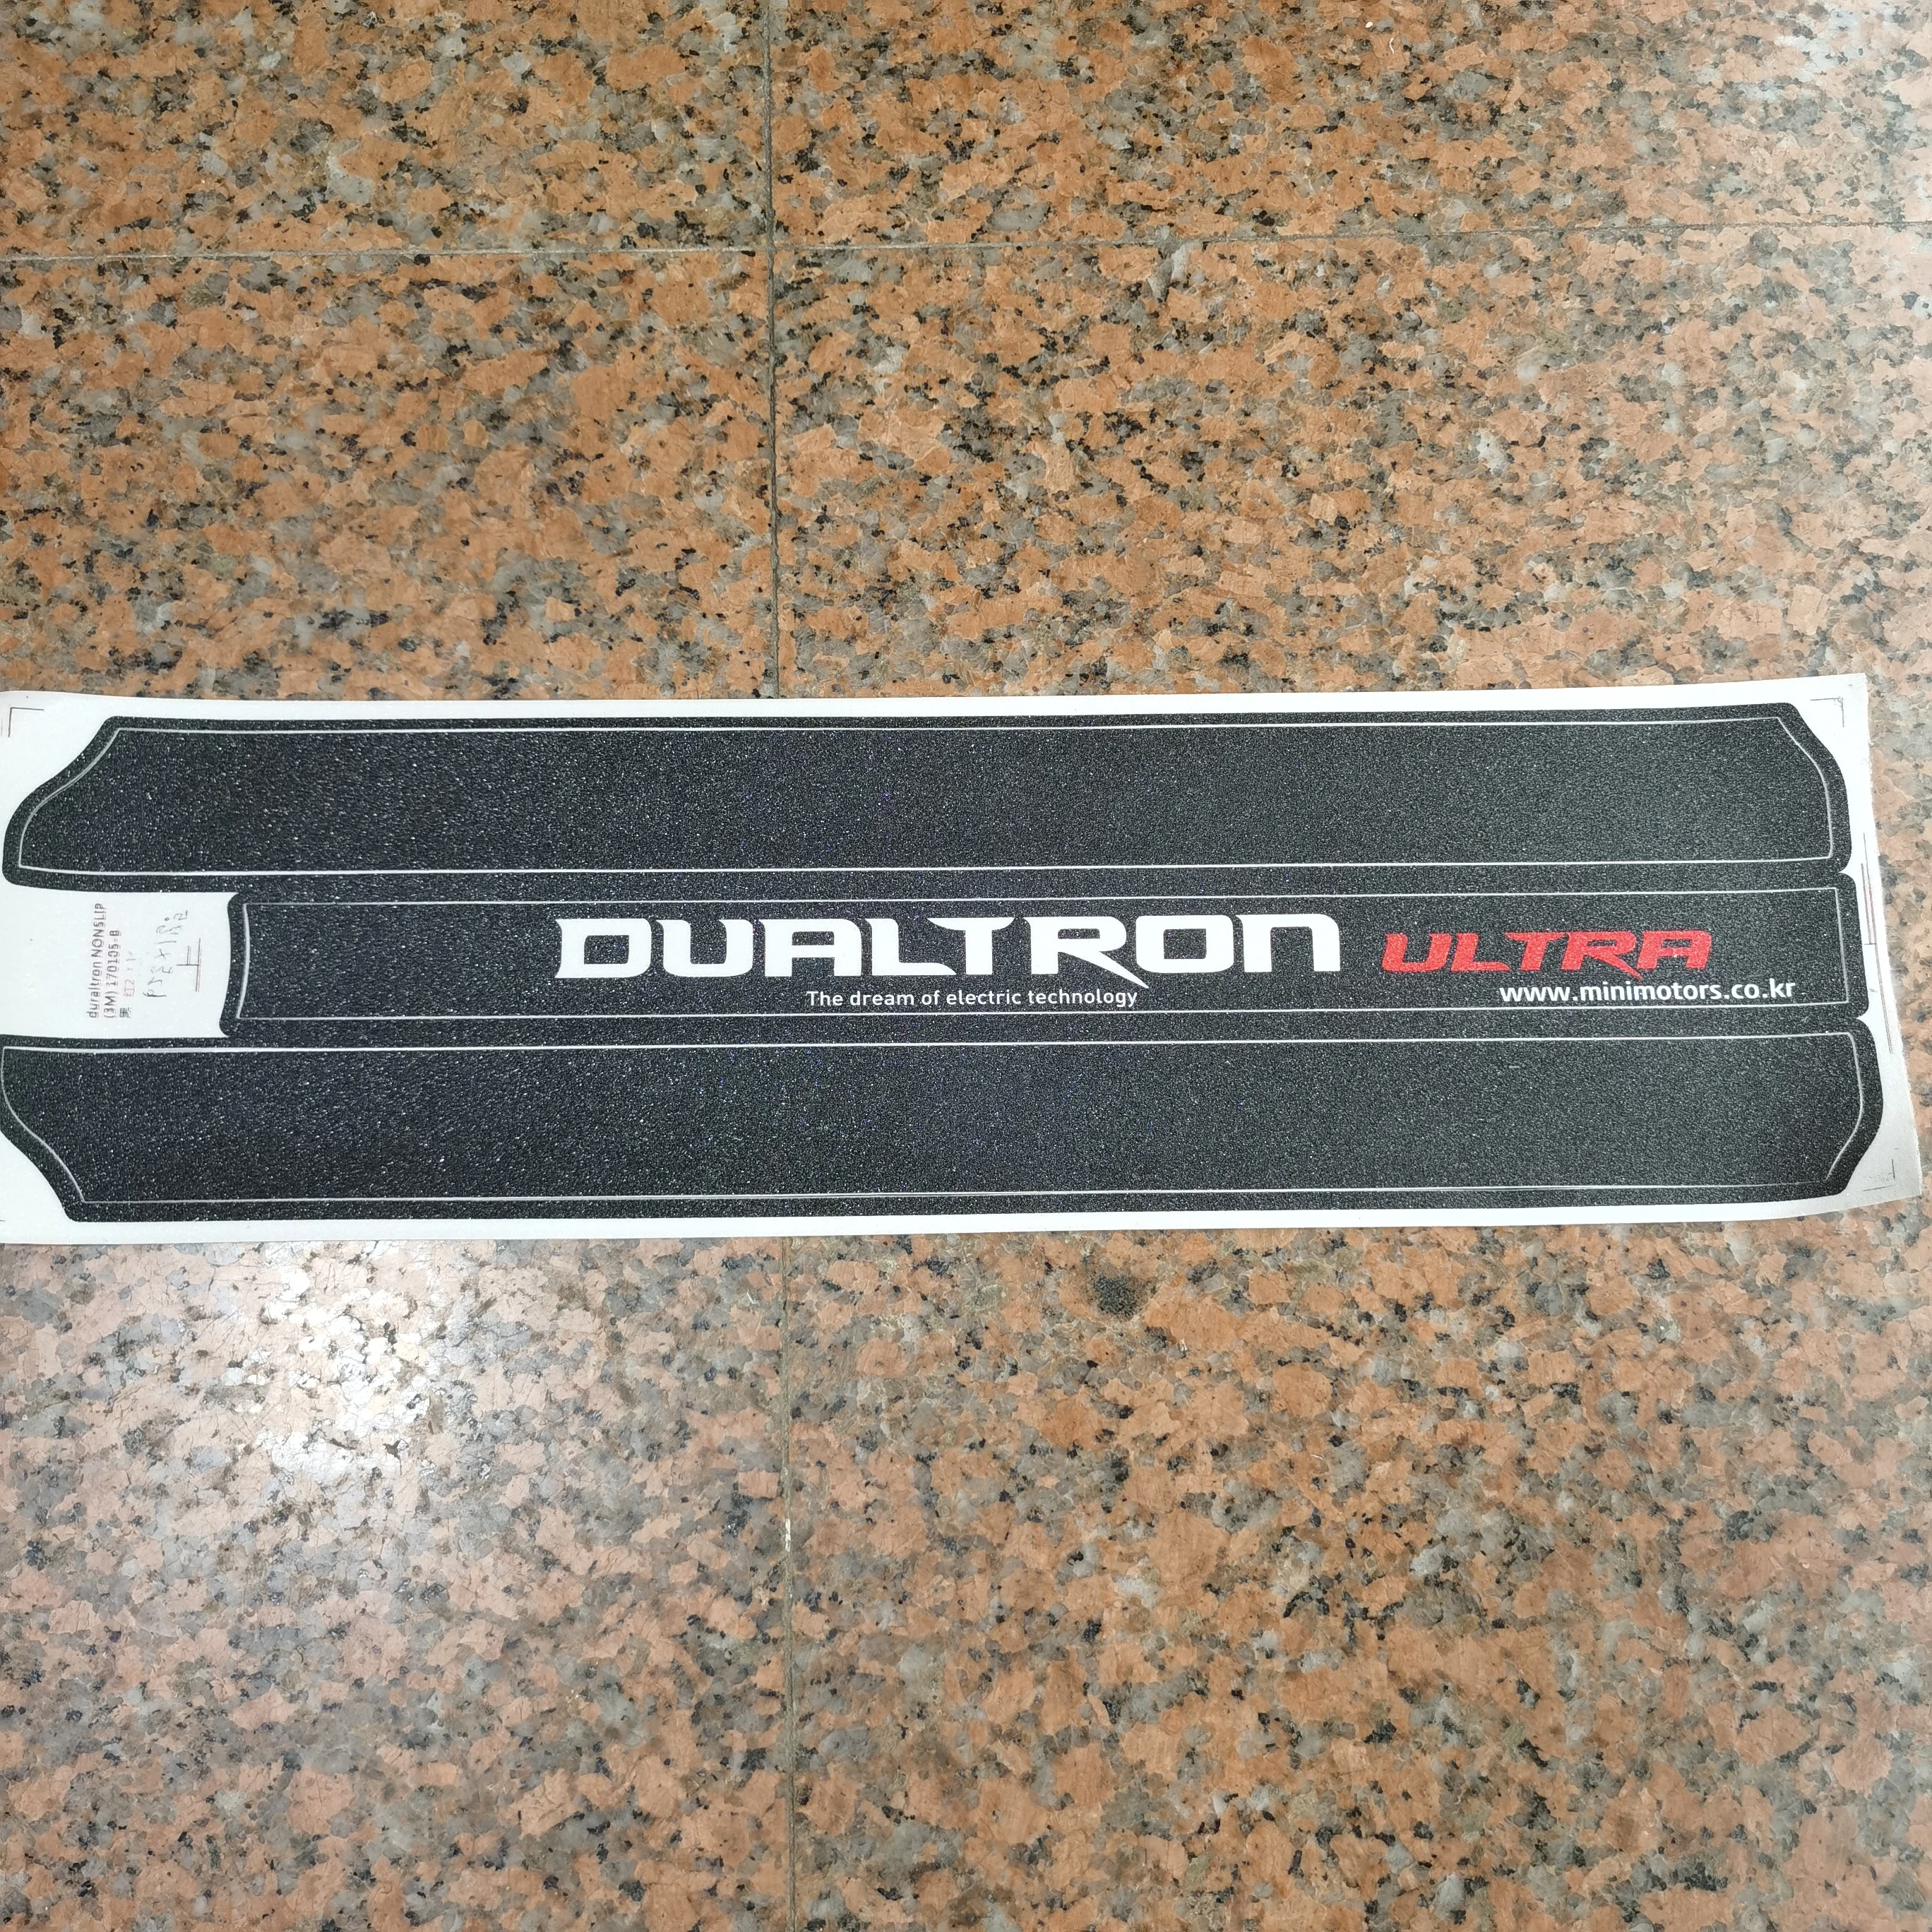 All series Deck Sticker for Dualtron electric scooter THUNDER Ultra, Raptor, DT3, DT2, Deck Sticker Non-Slip Decal